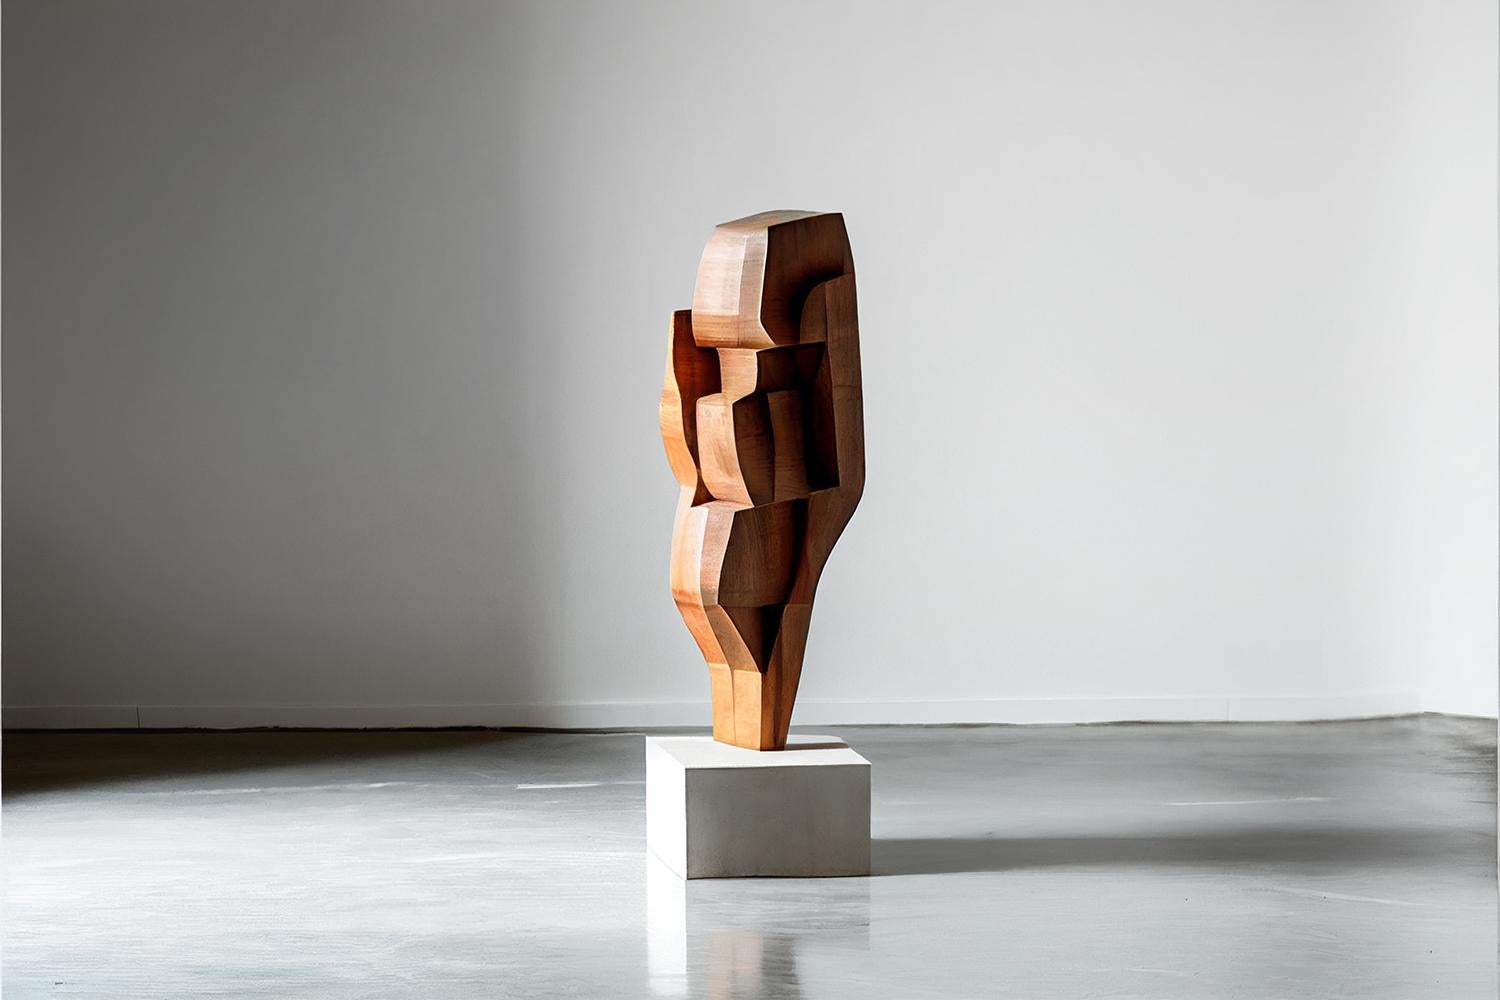 Abstract wood sculpture in the flair of Scandinavian Art, Unseen Force by Joel Escalona.

This monolithic sculpture, designed by the talented Artist Joel Escalona, is a towering example of beauty in craftsmanship. Hand and digital machine made;